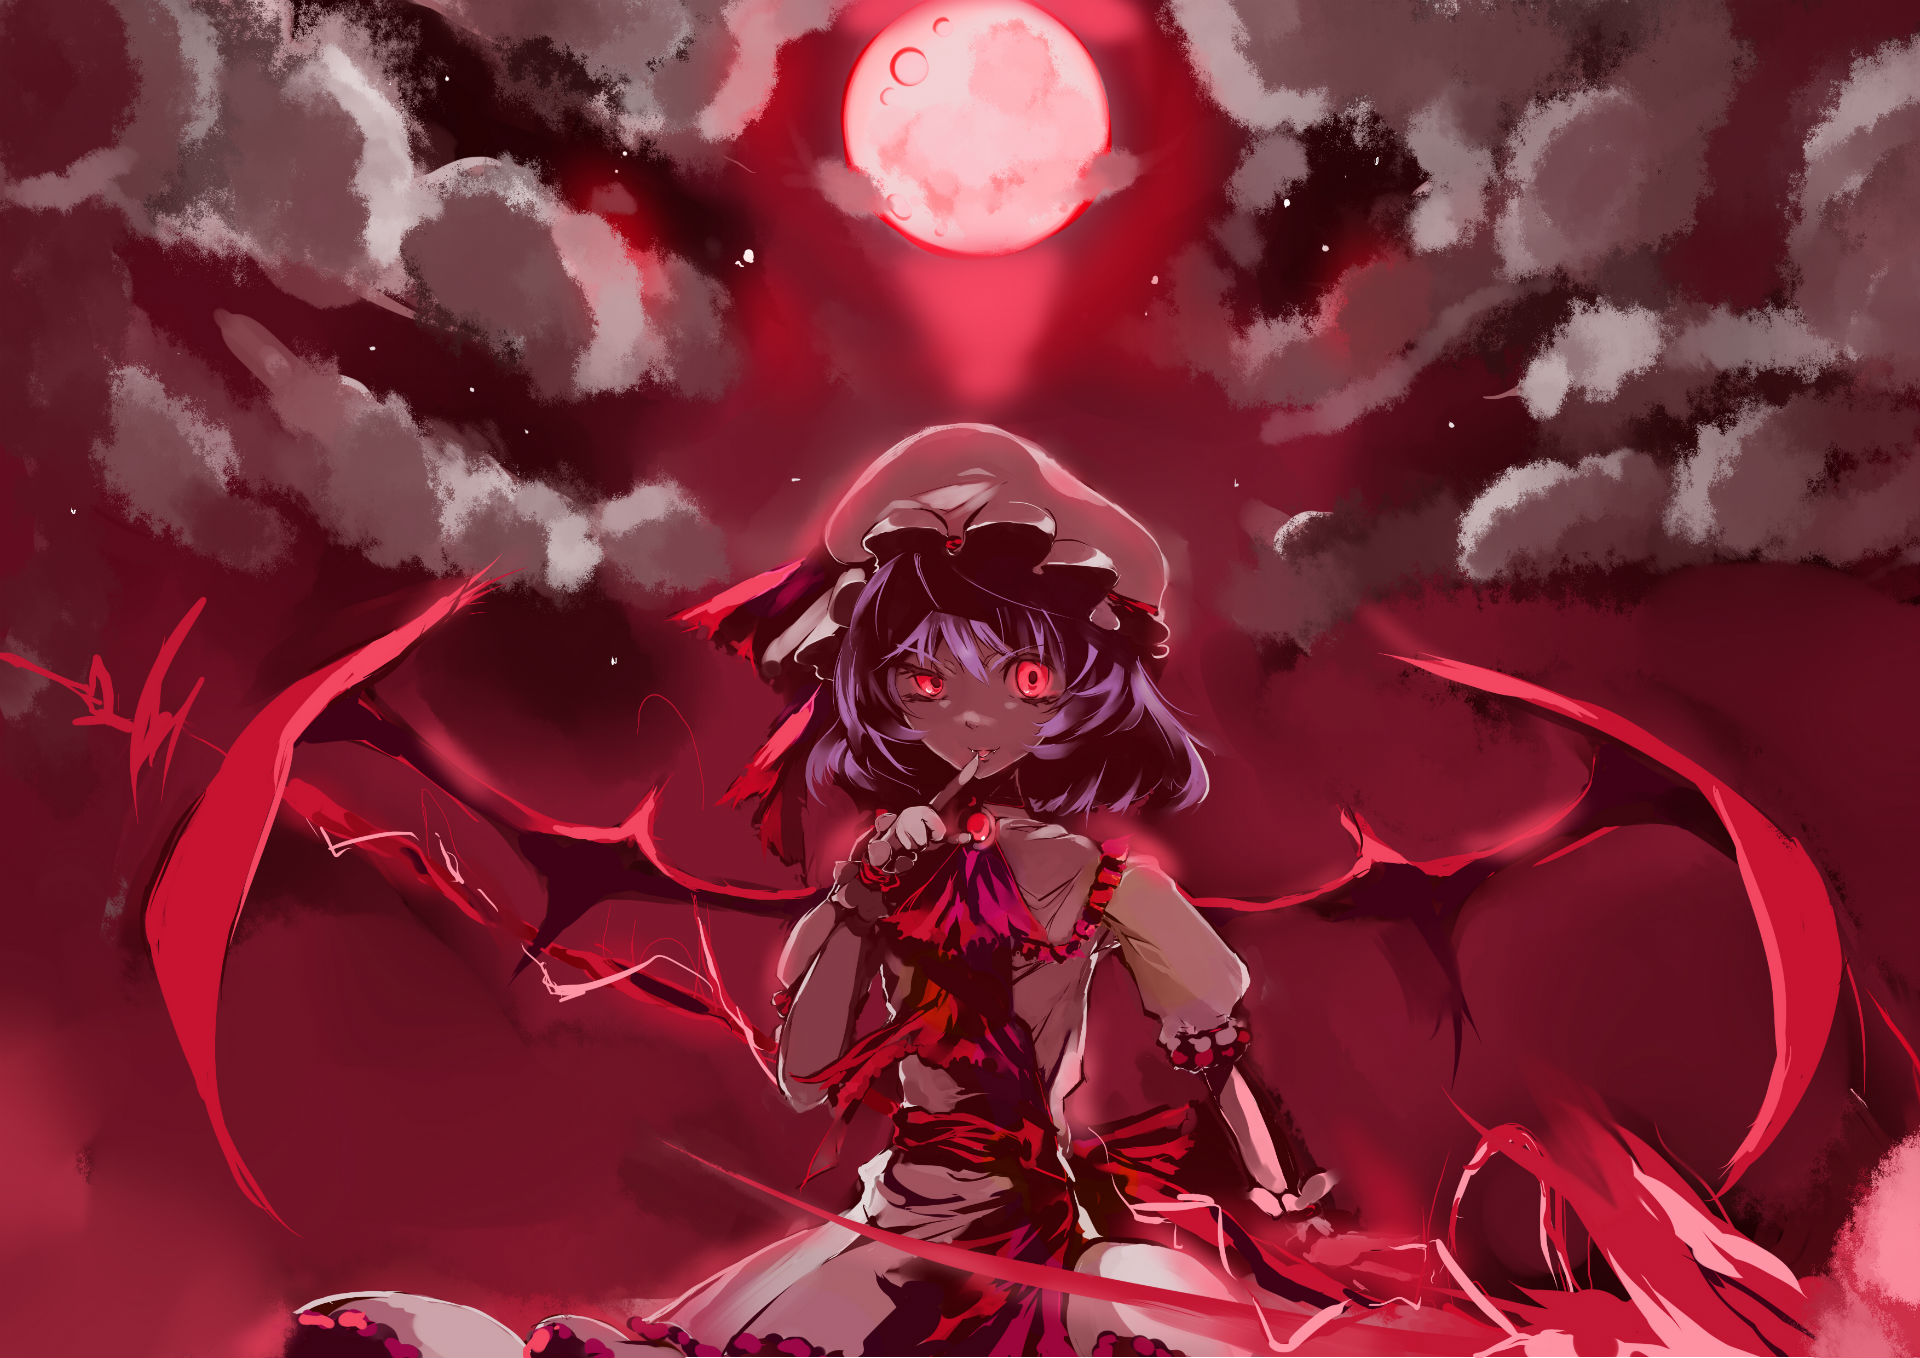 blaze,  artist , Clouds, Fang, Hat, Moon, Night, Purple, Hair, Red, Red, Eyes, Remilia, Scarlet, Ribbons, Short, Hair, Sky, Spear, Touhou, Weapon, Wings Wallpaper